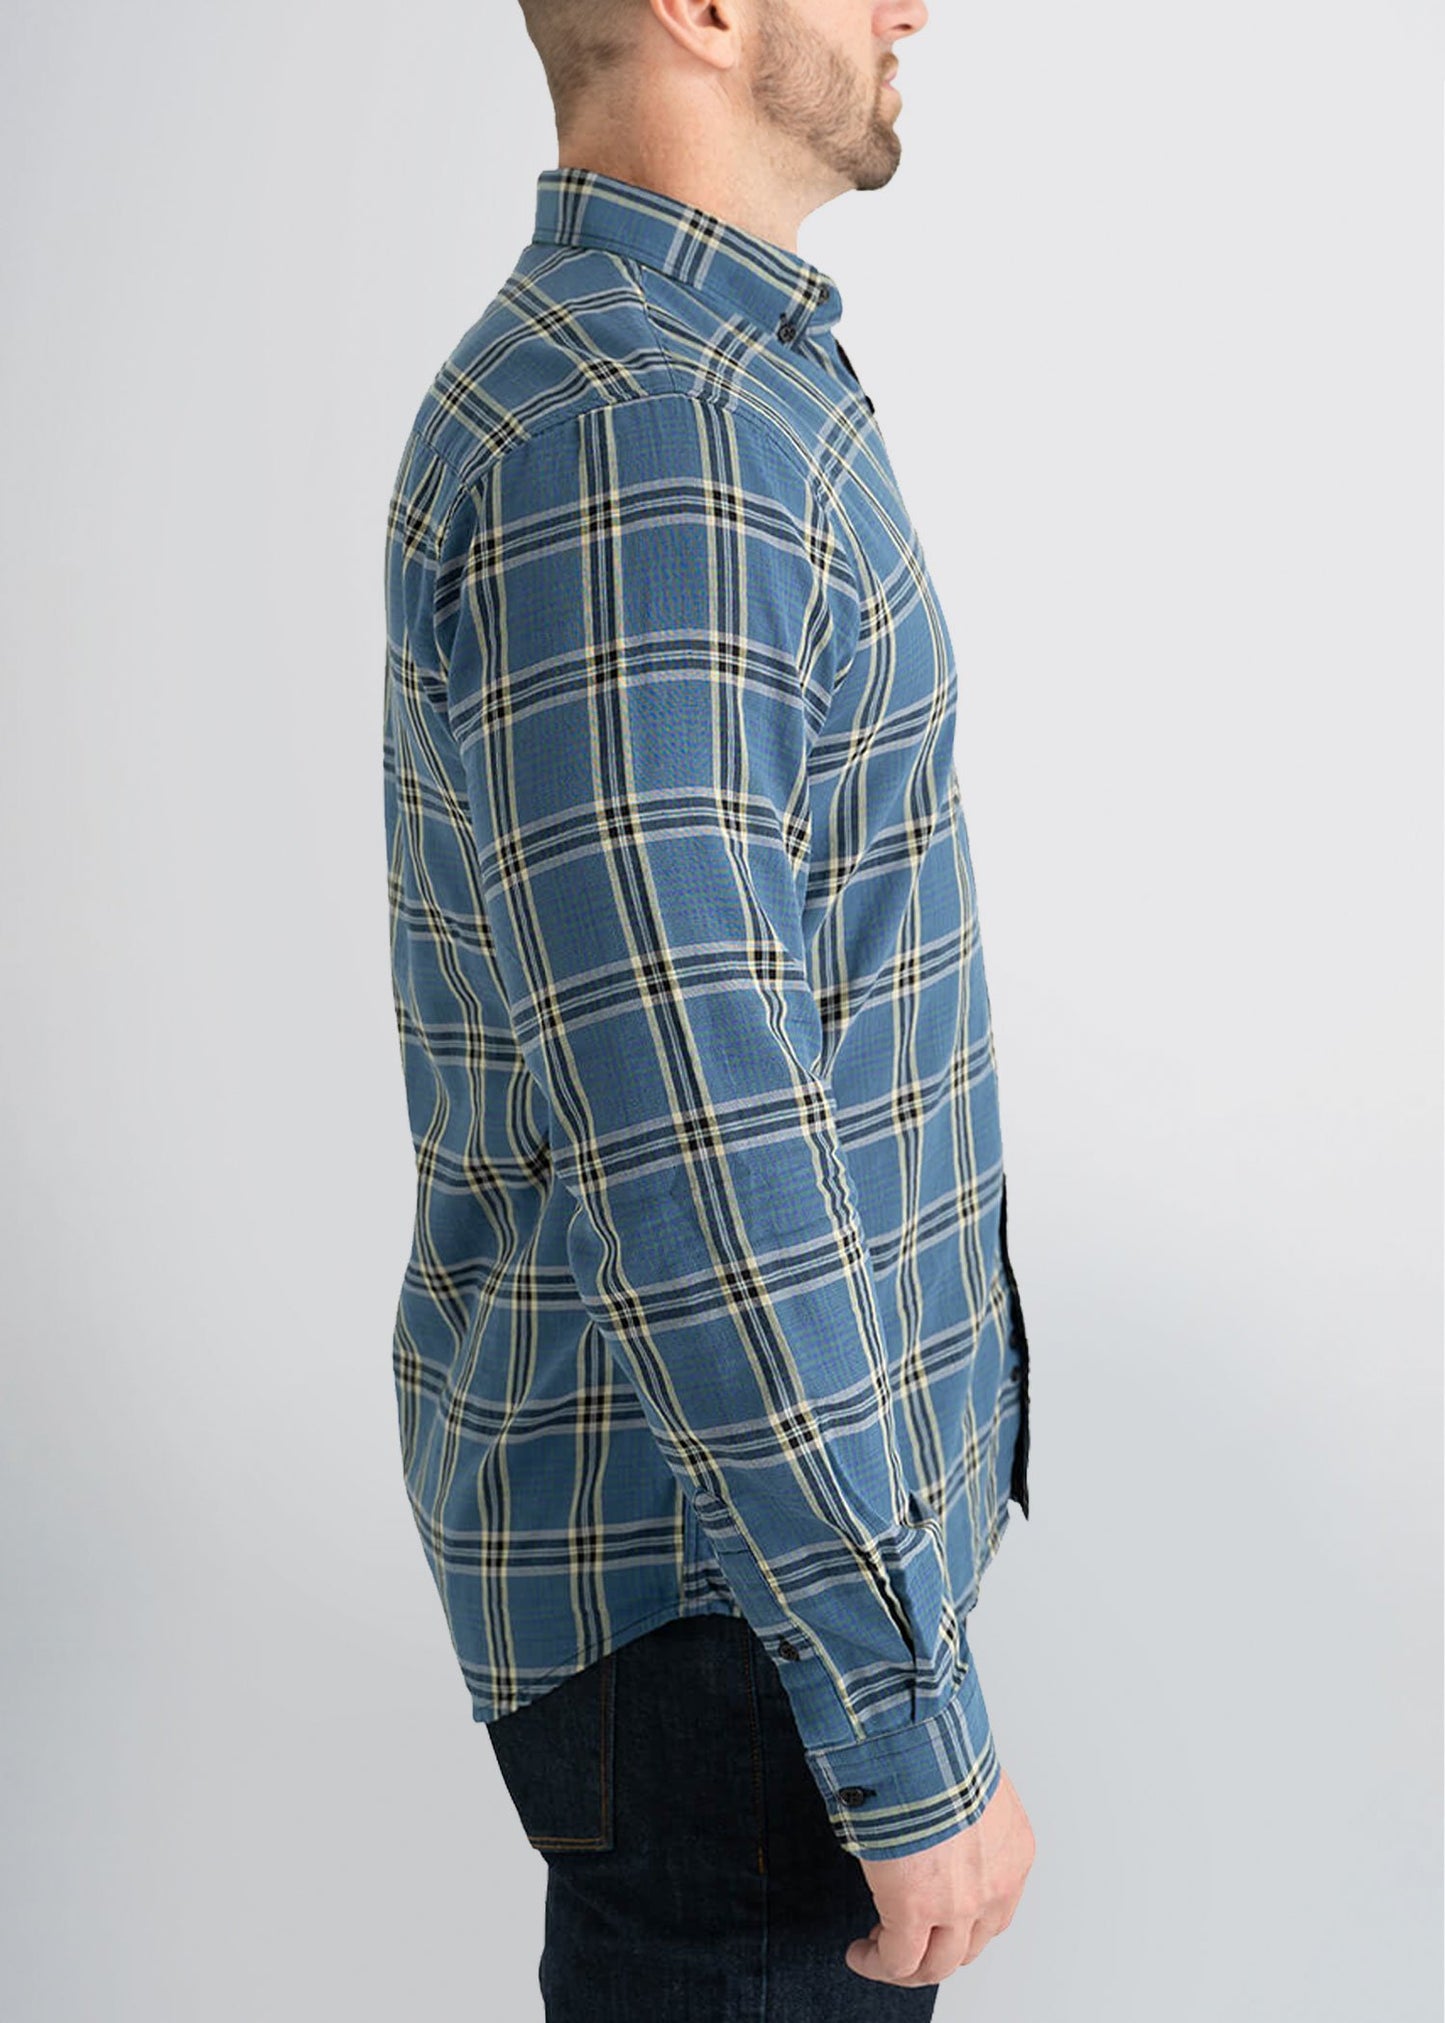 american-tall-mens-double-weave-blueplaid-side